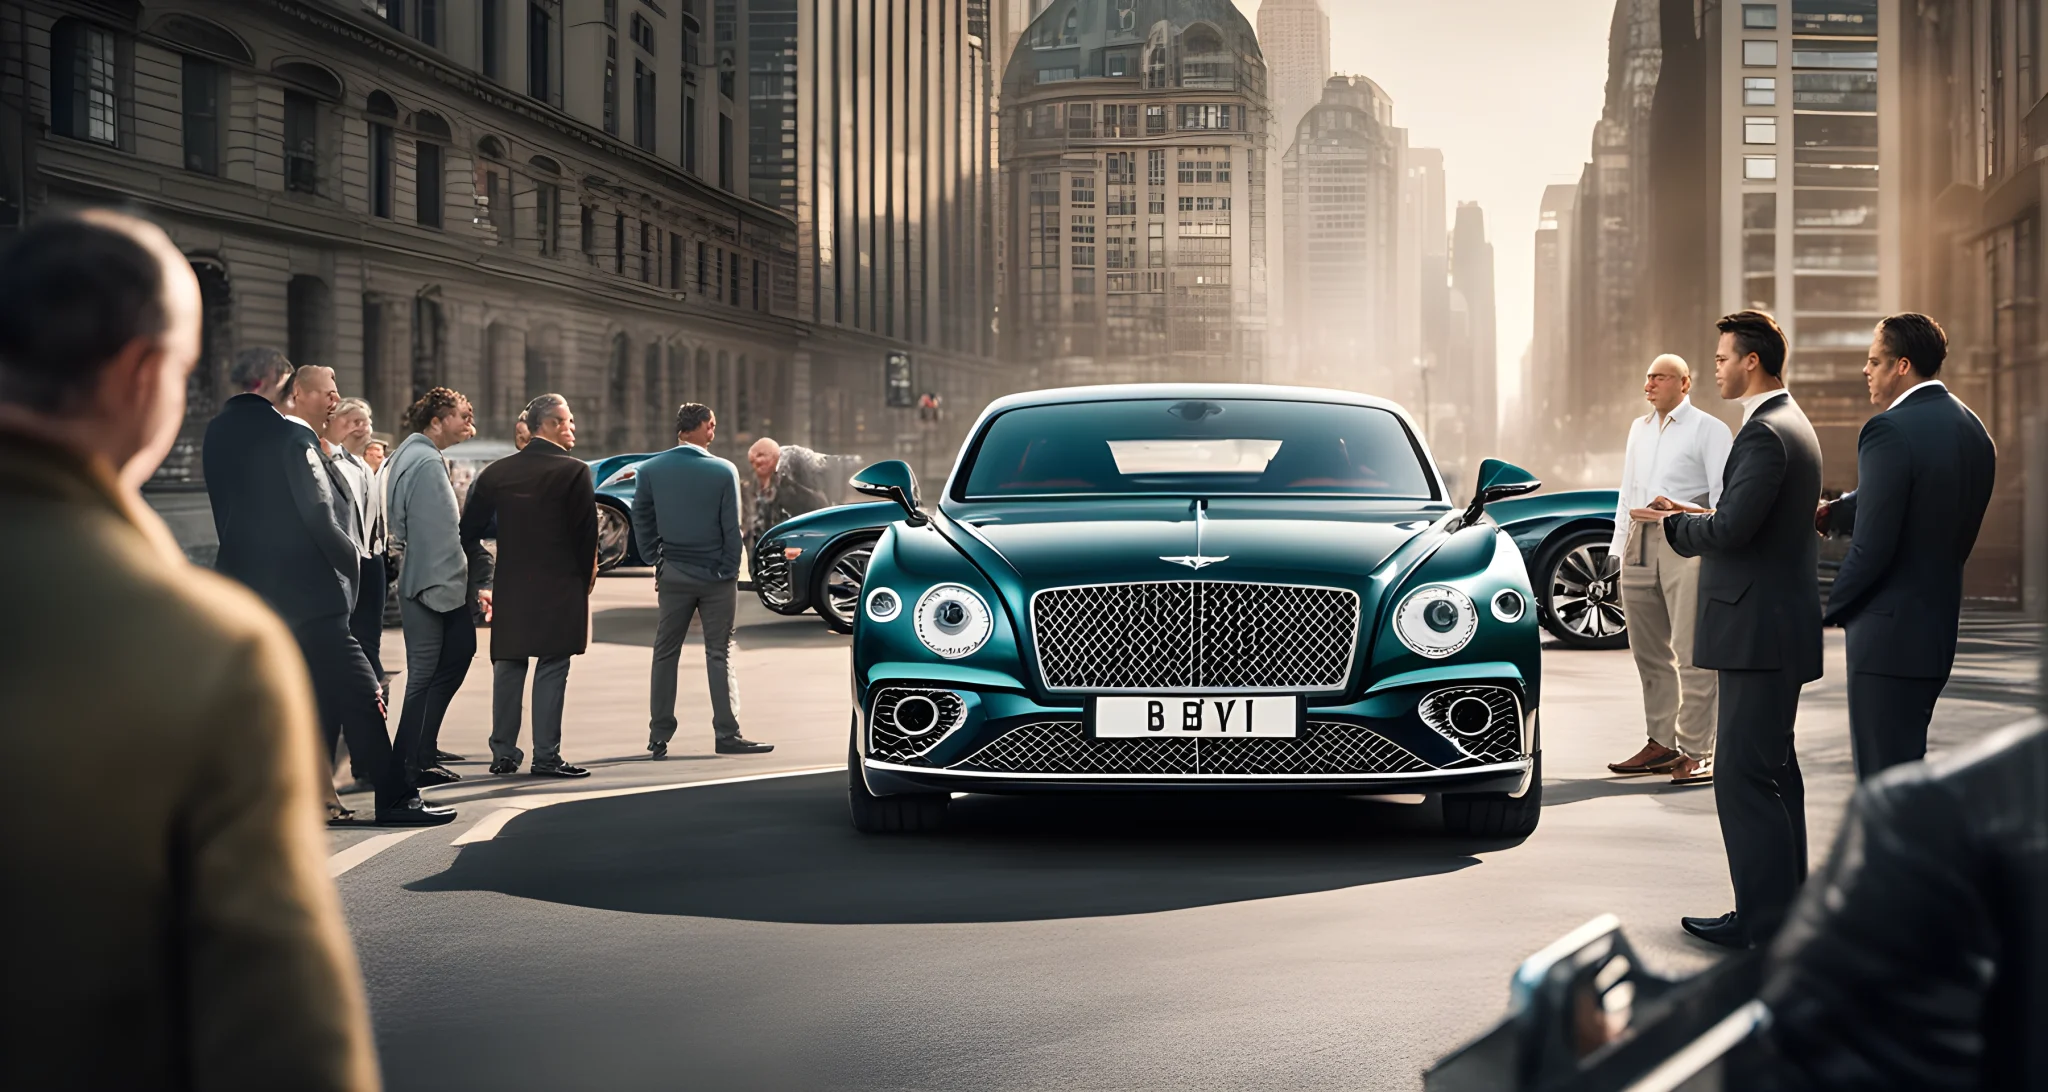 The image features a sleek, luxurious Bentley car parked in front of a backdrop of city buildings, with a group of enthusiasts gathered around discussing the vehicle.